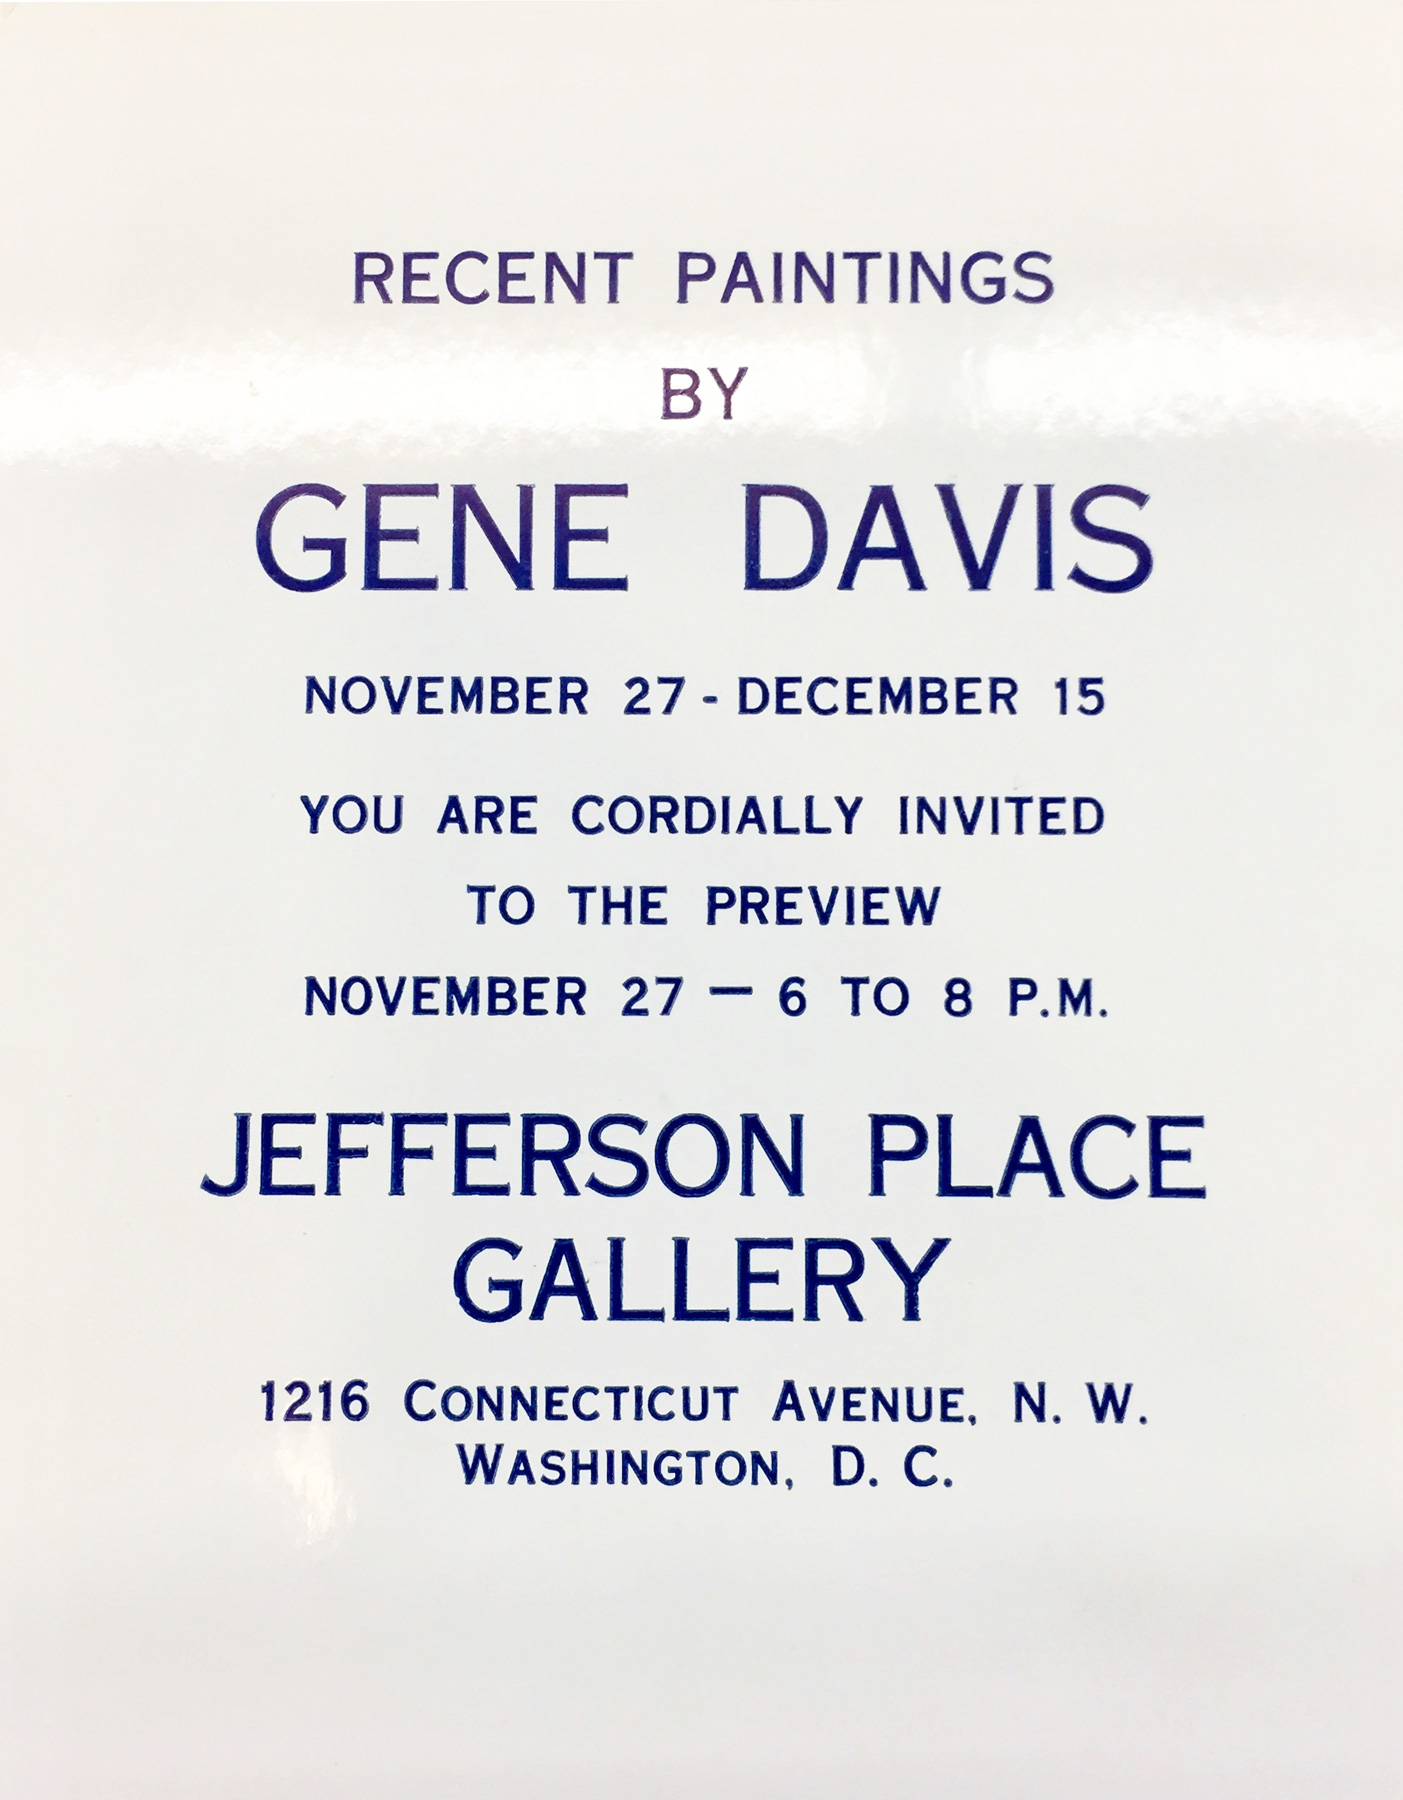 Announcement card for Gene Davis's Recent Paintings at Jefferson Place Gallery